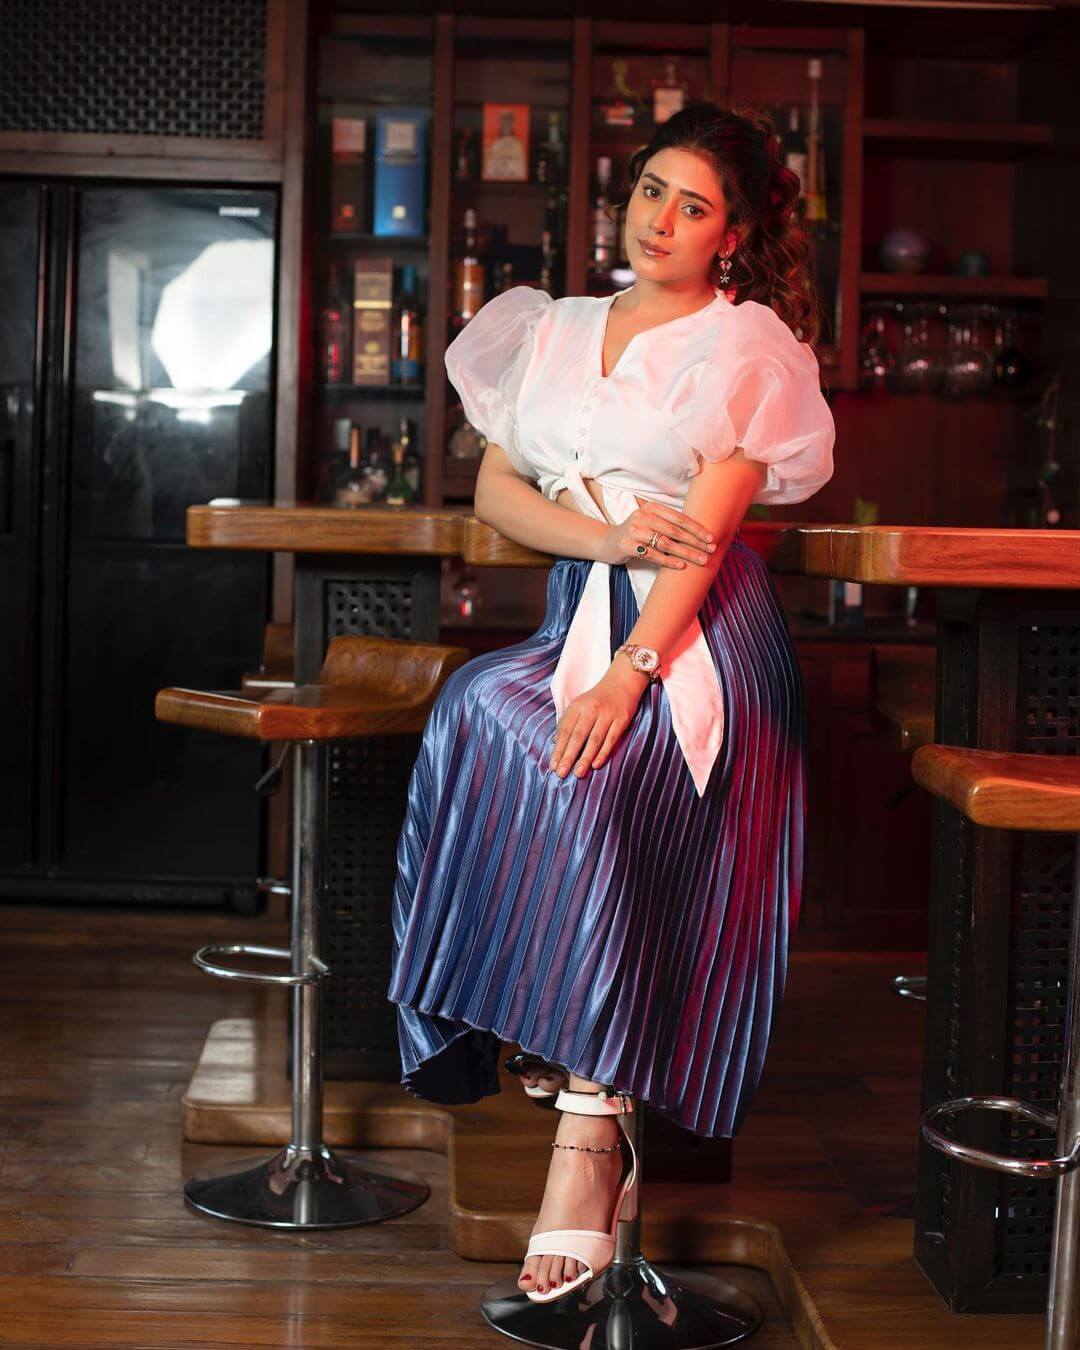 Hiba Look Pretty In a White Puffed Top With Accordion Skirt